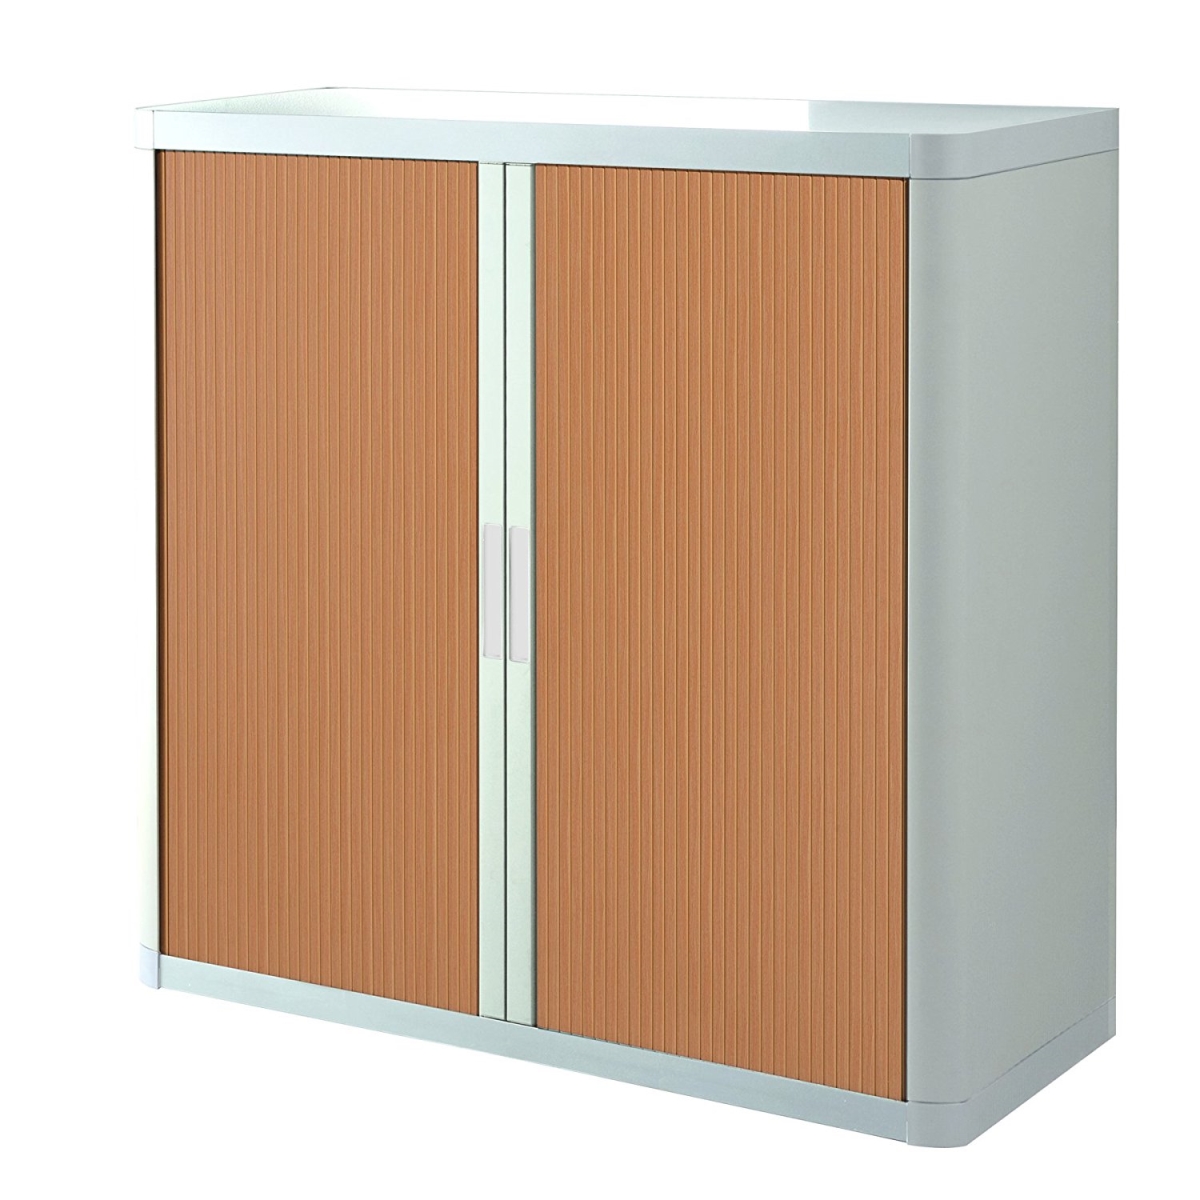 E1ct0009700042 41 In. Easyoffice Storage Cabinet, White & Beech